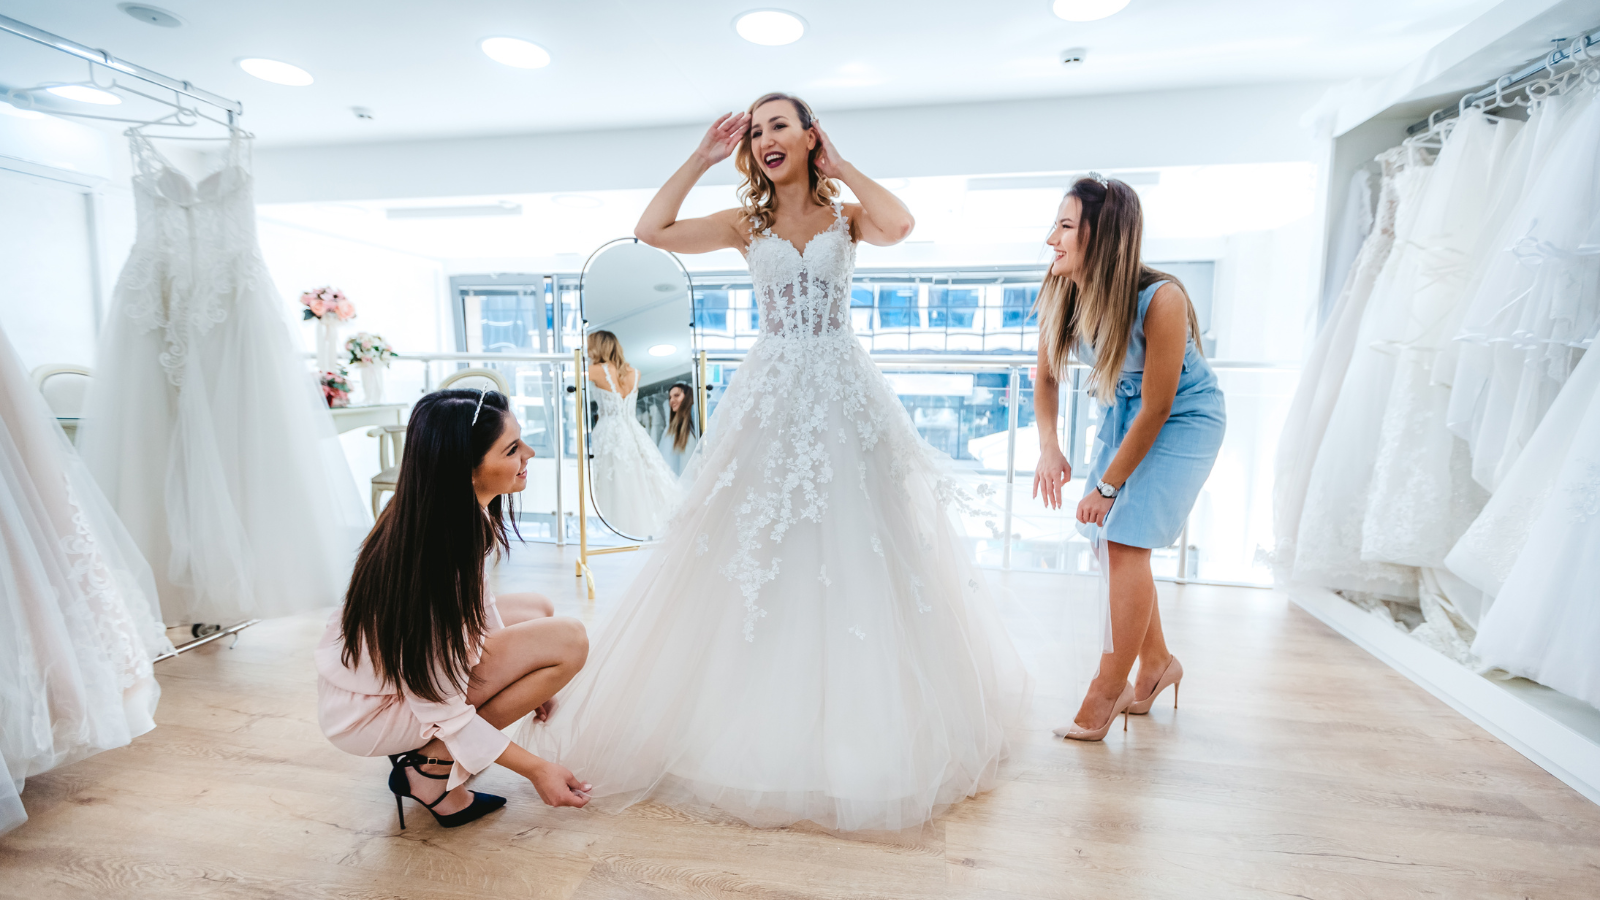 Affordable Options for Your Fairytale Wedding Dress